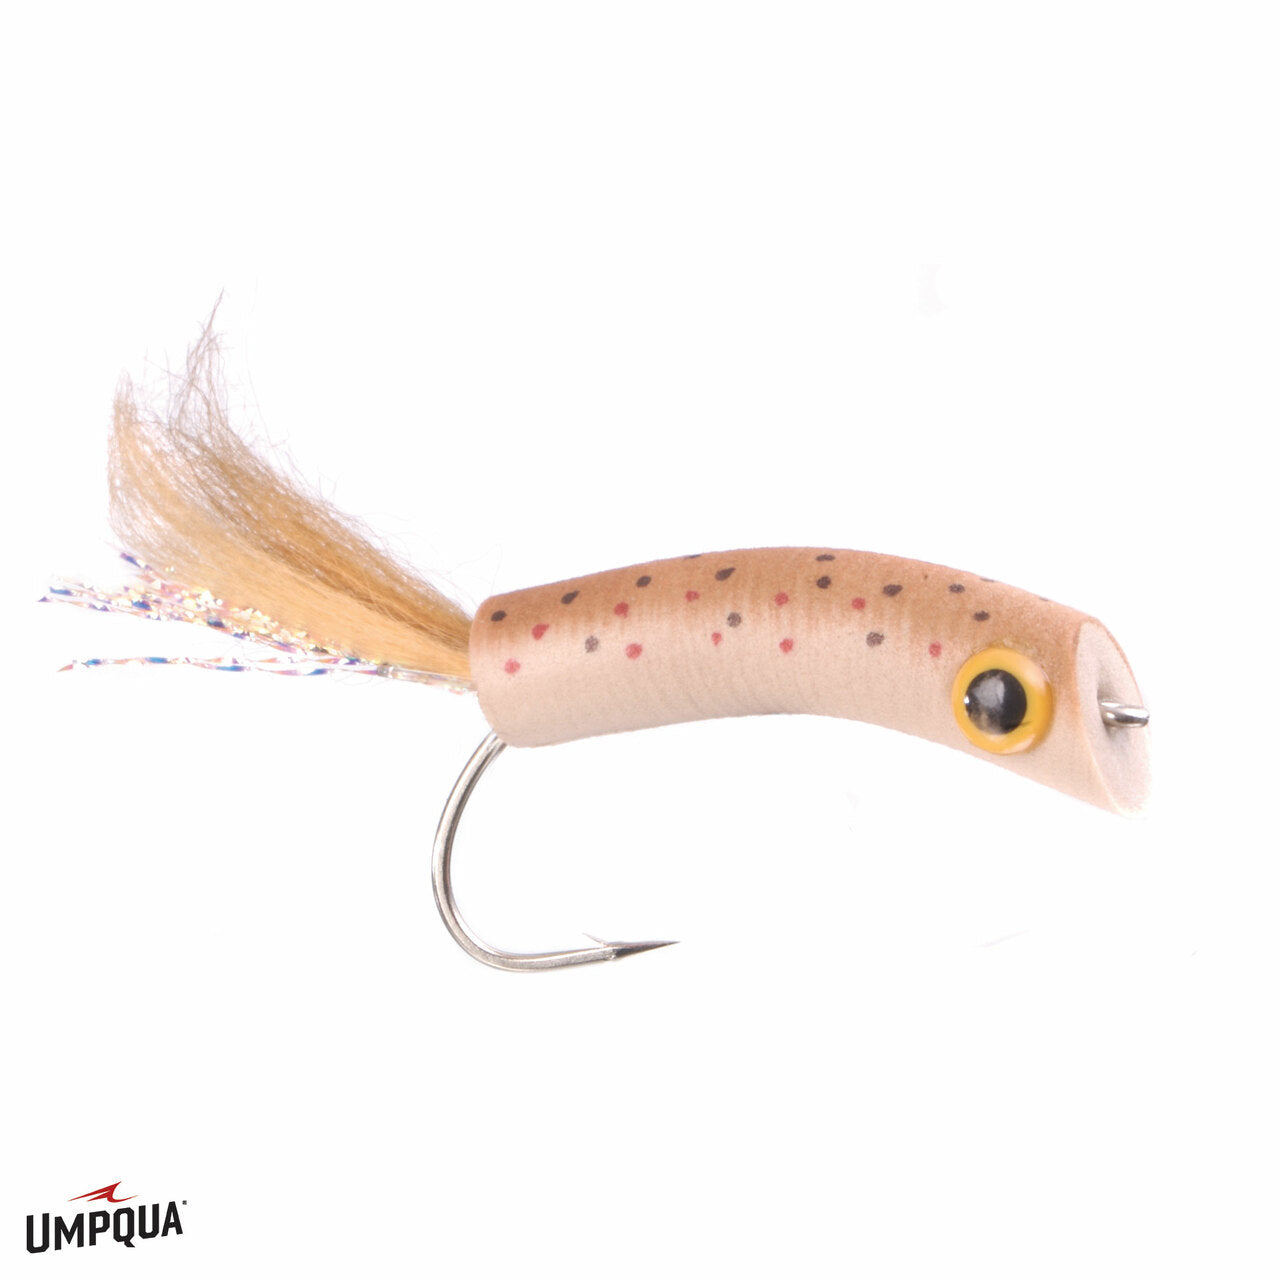 TODD'S WIGGLE MINNOW - Rivers & Glen Trading Co.